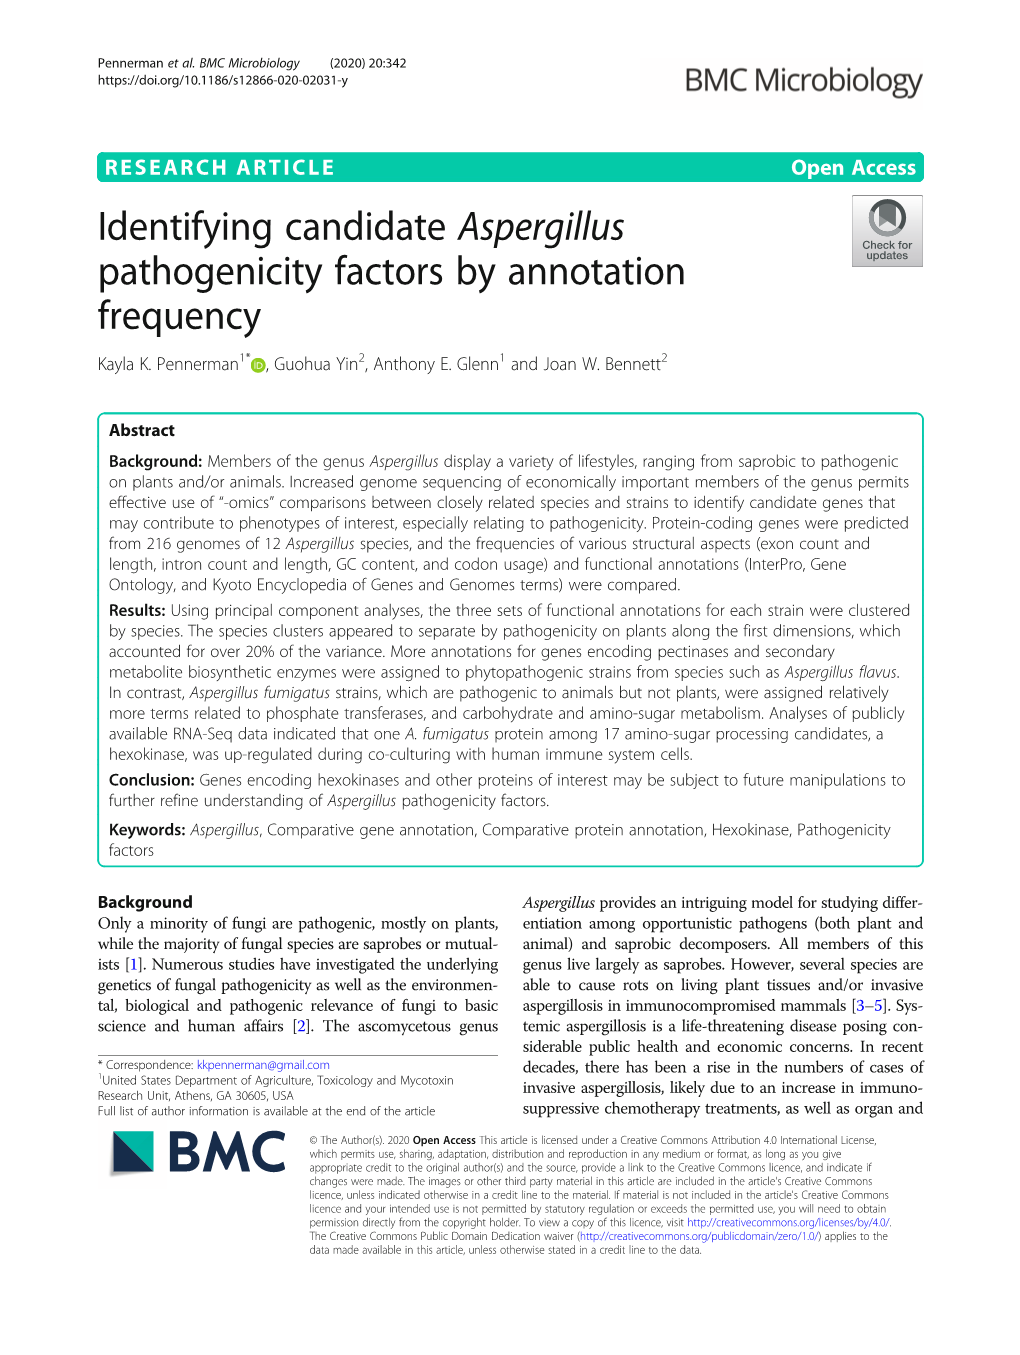 Identifying Candidate Aspergillus Pathogenicity Factors by Annotation Frequency Kayla K